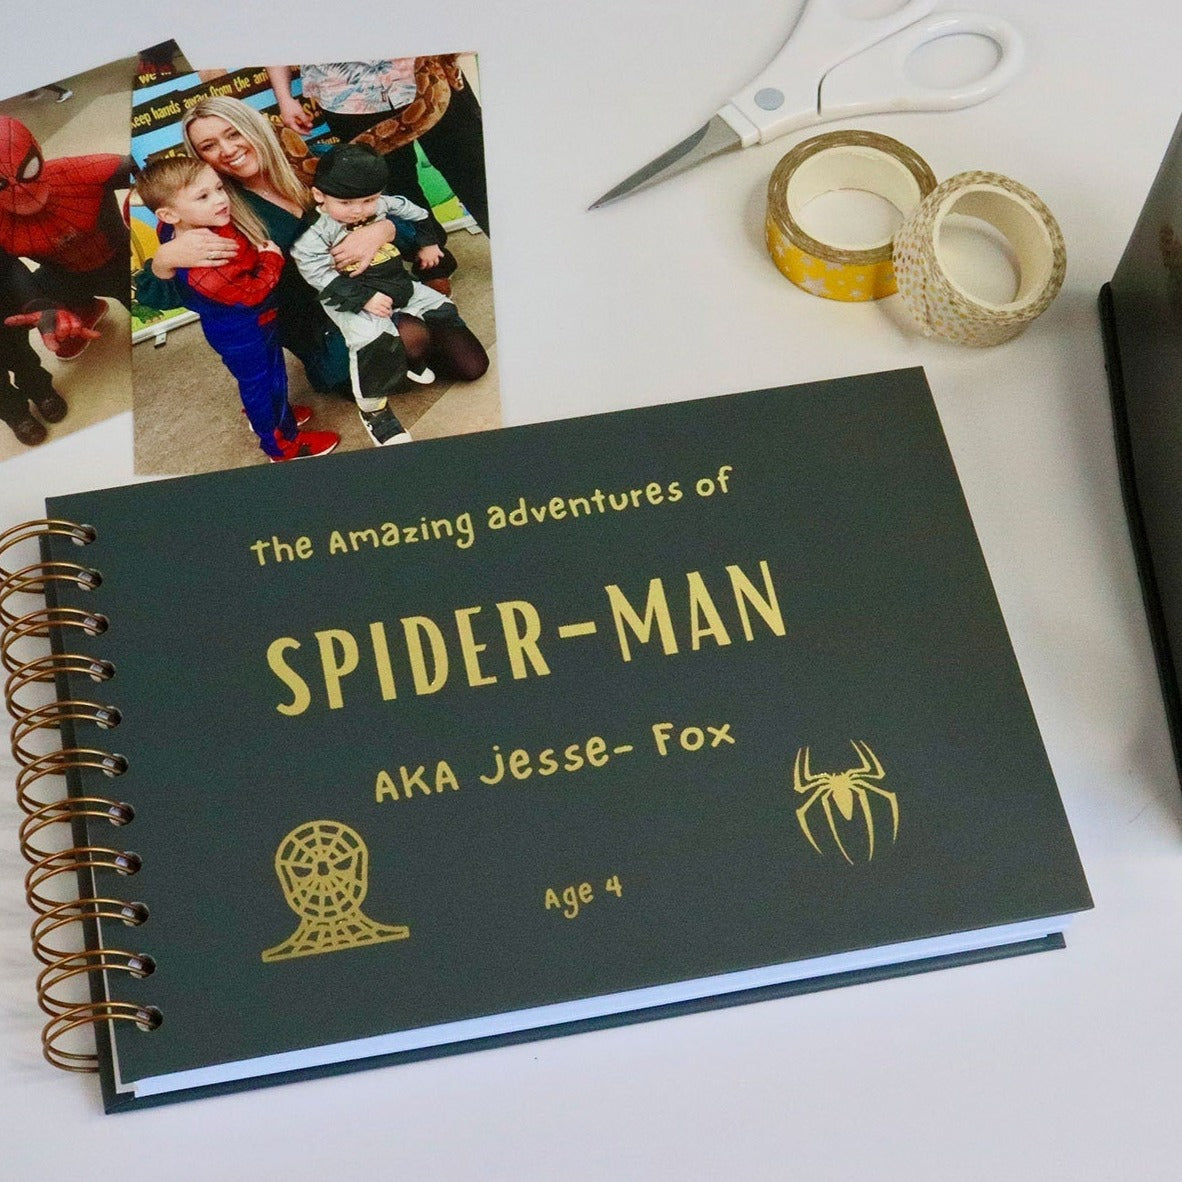 An A5 charcoal kids memory book which says 'The amazing adventures of Spiderman AKA Jesse-Fox' with two images of spiderman all in golf foil.